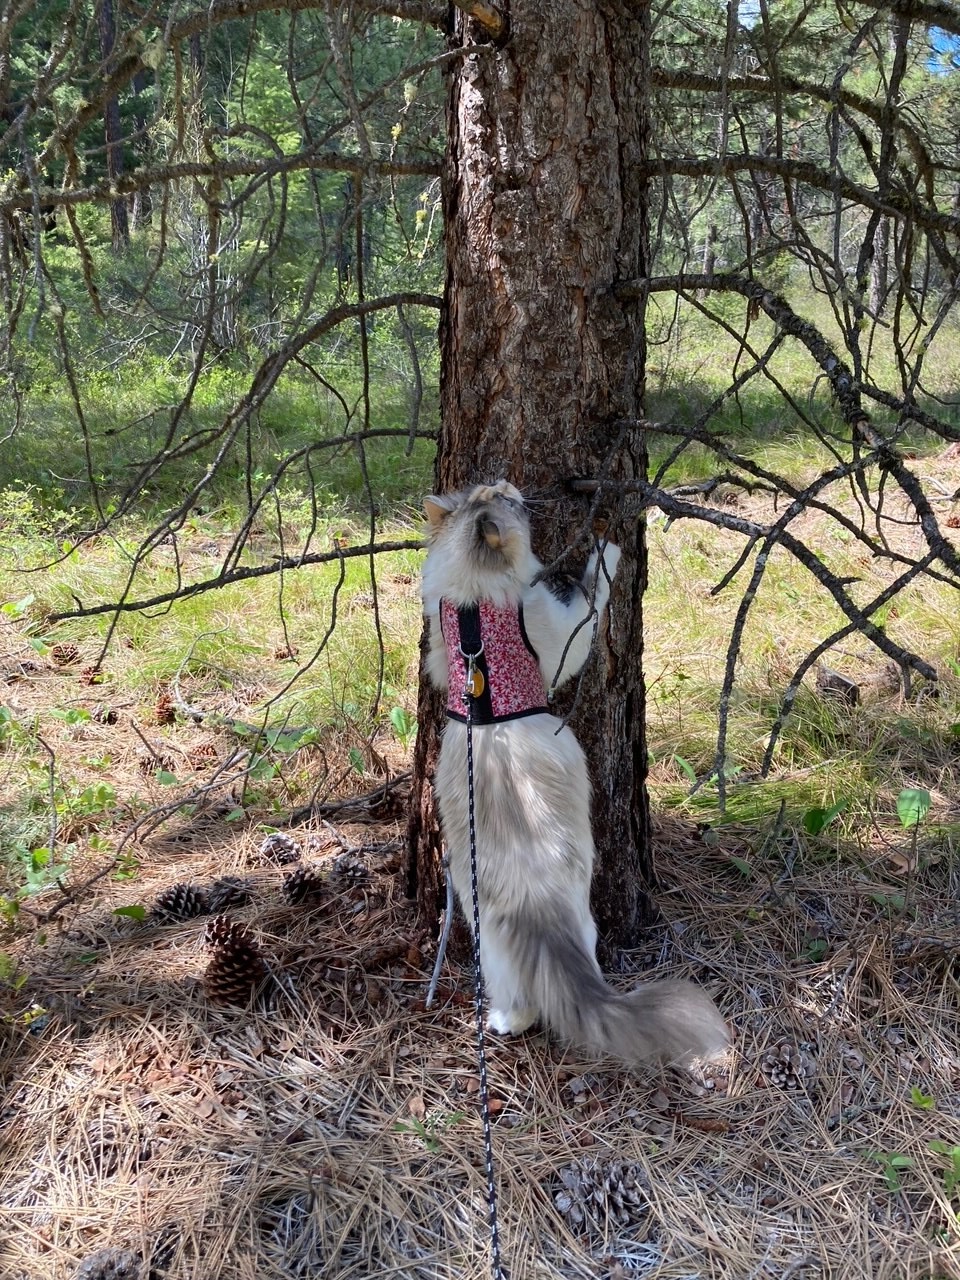 A fluffy white cat stands on her hind legs with her front legs against a tree trunk as she looks up into the branches.